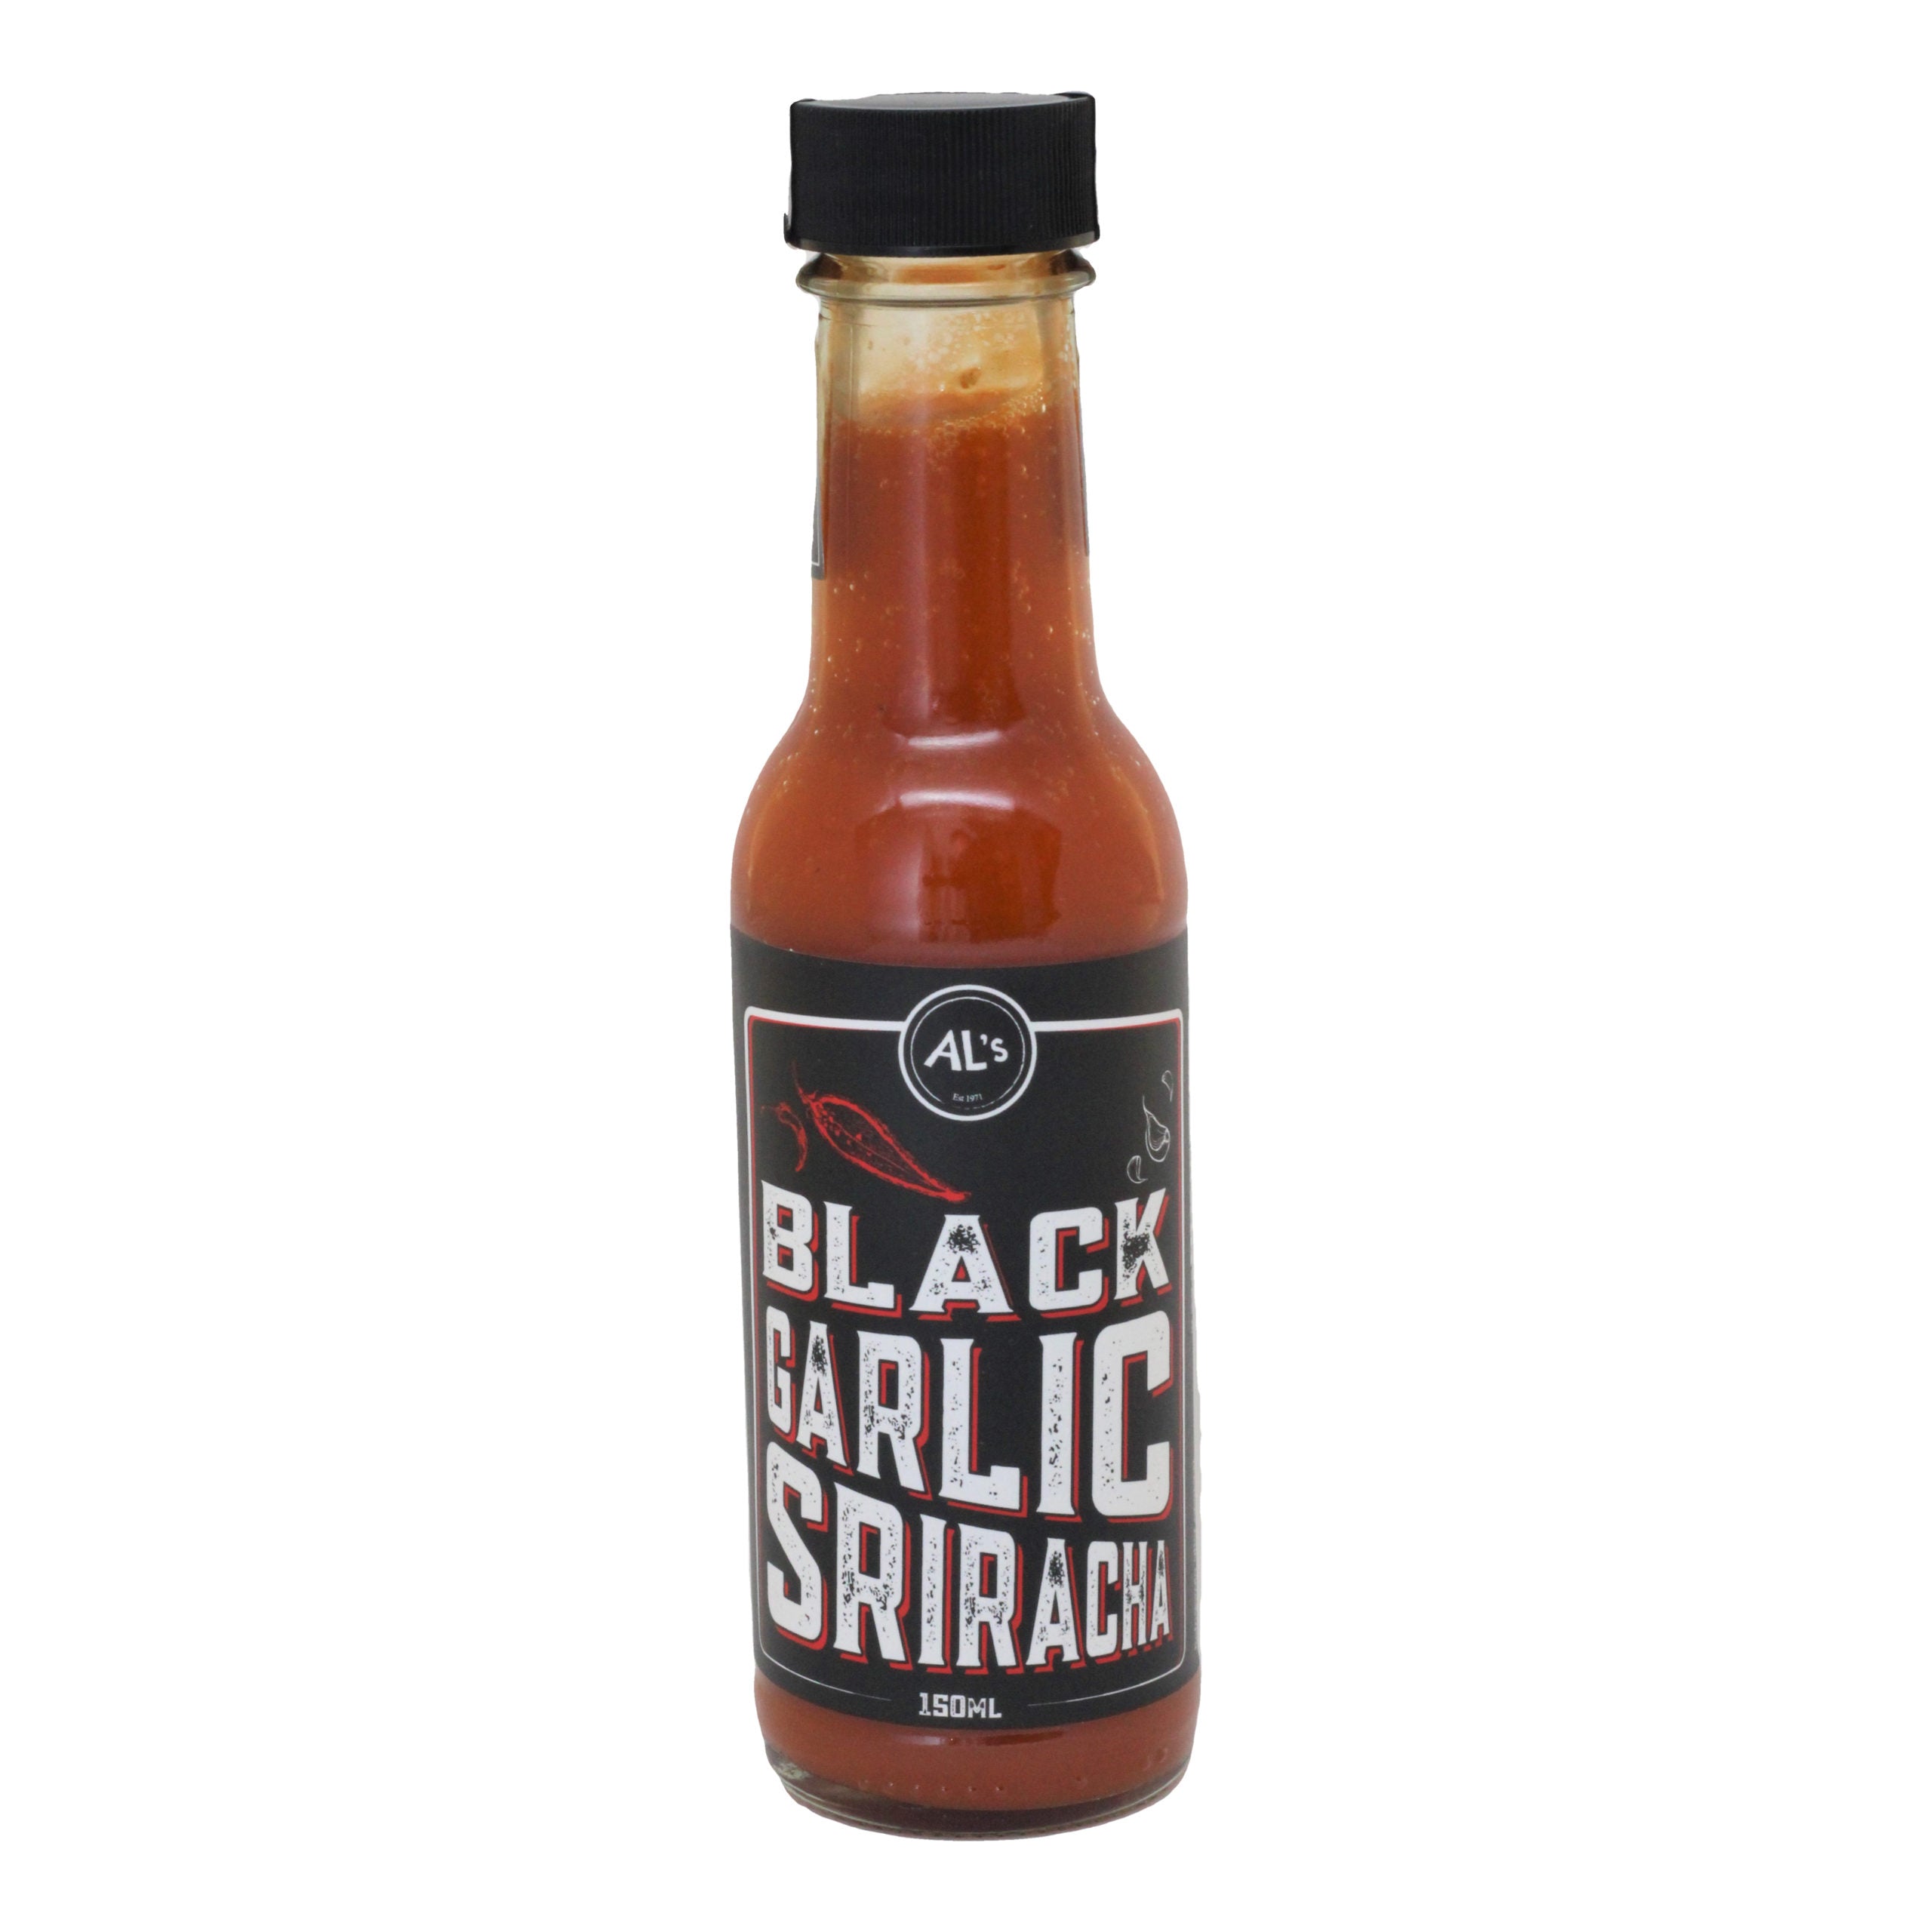 A bottle of His black garlic sriracha sauce, 150 ml, displaying a dark label with red and white text, isolated on a white background.